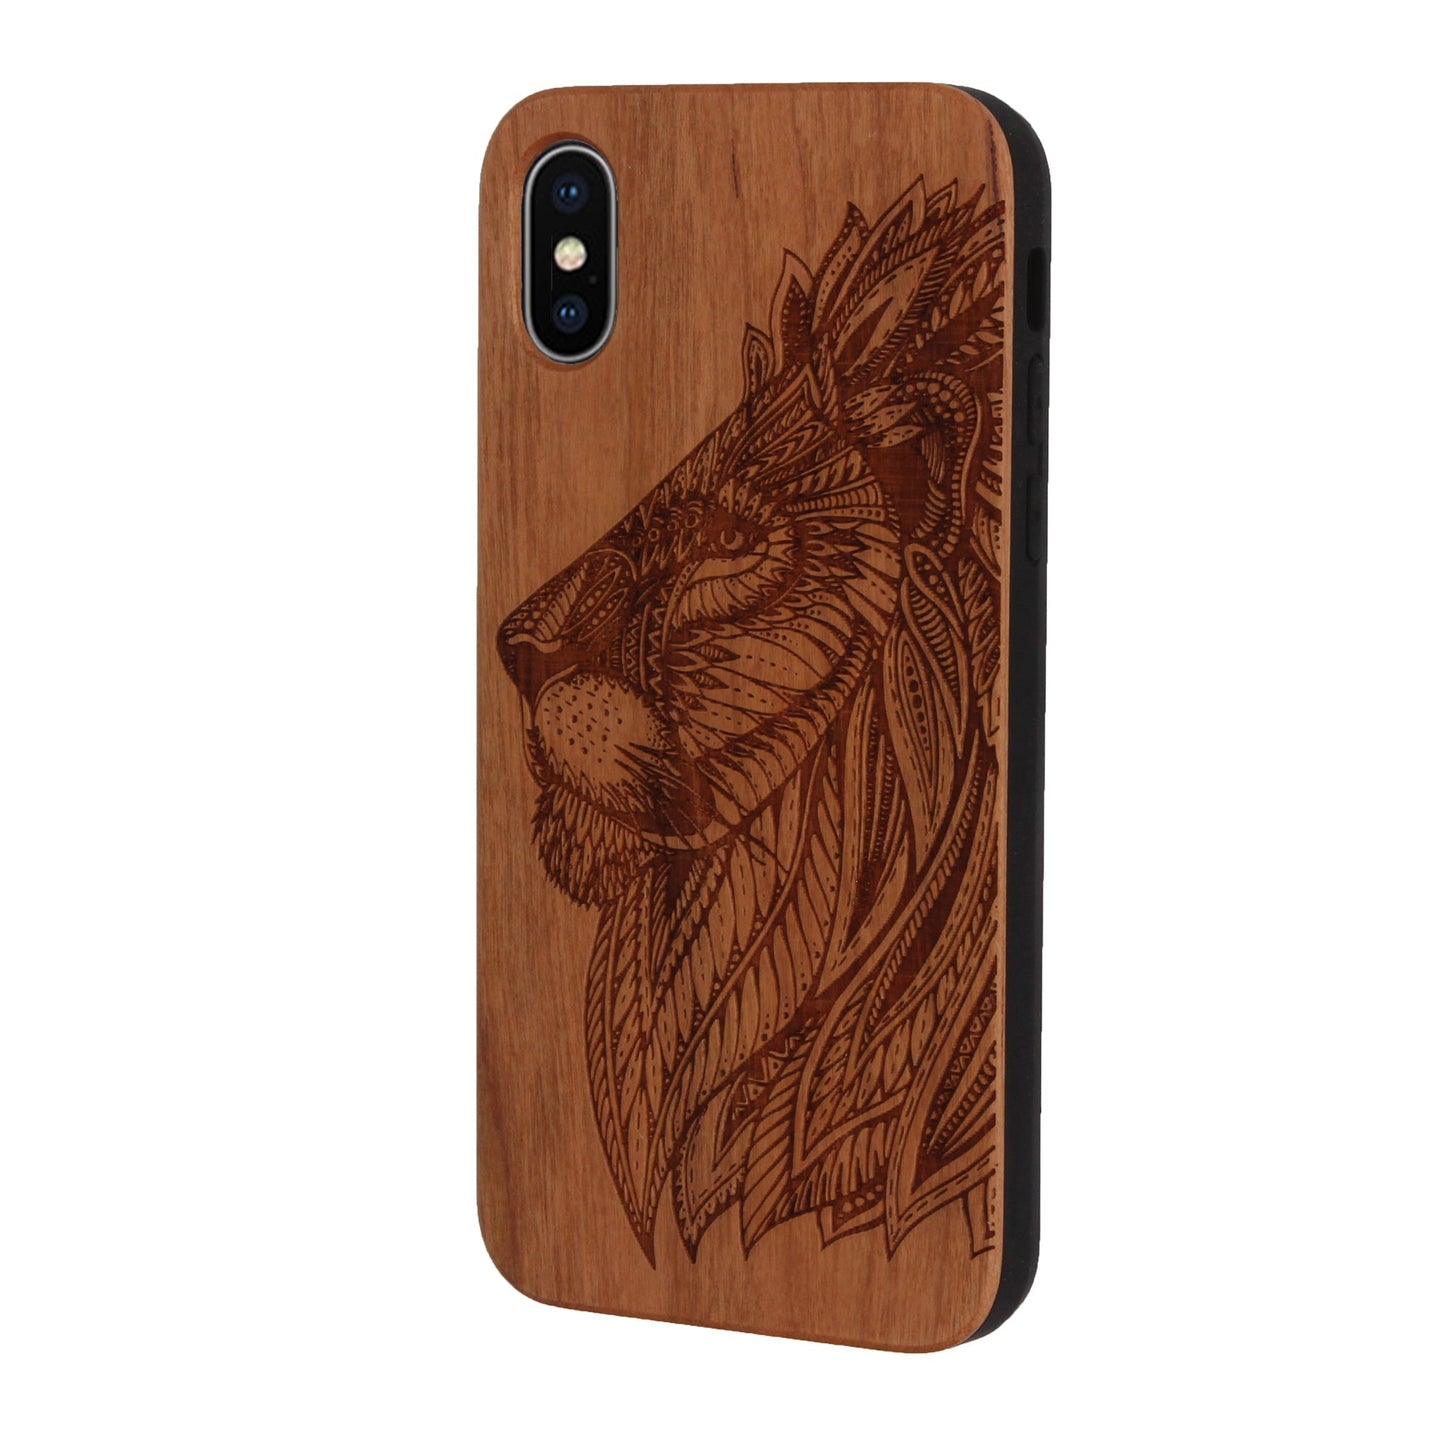 Cherry Wood Lion Eden Case for iPhone XS Max